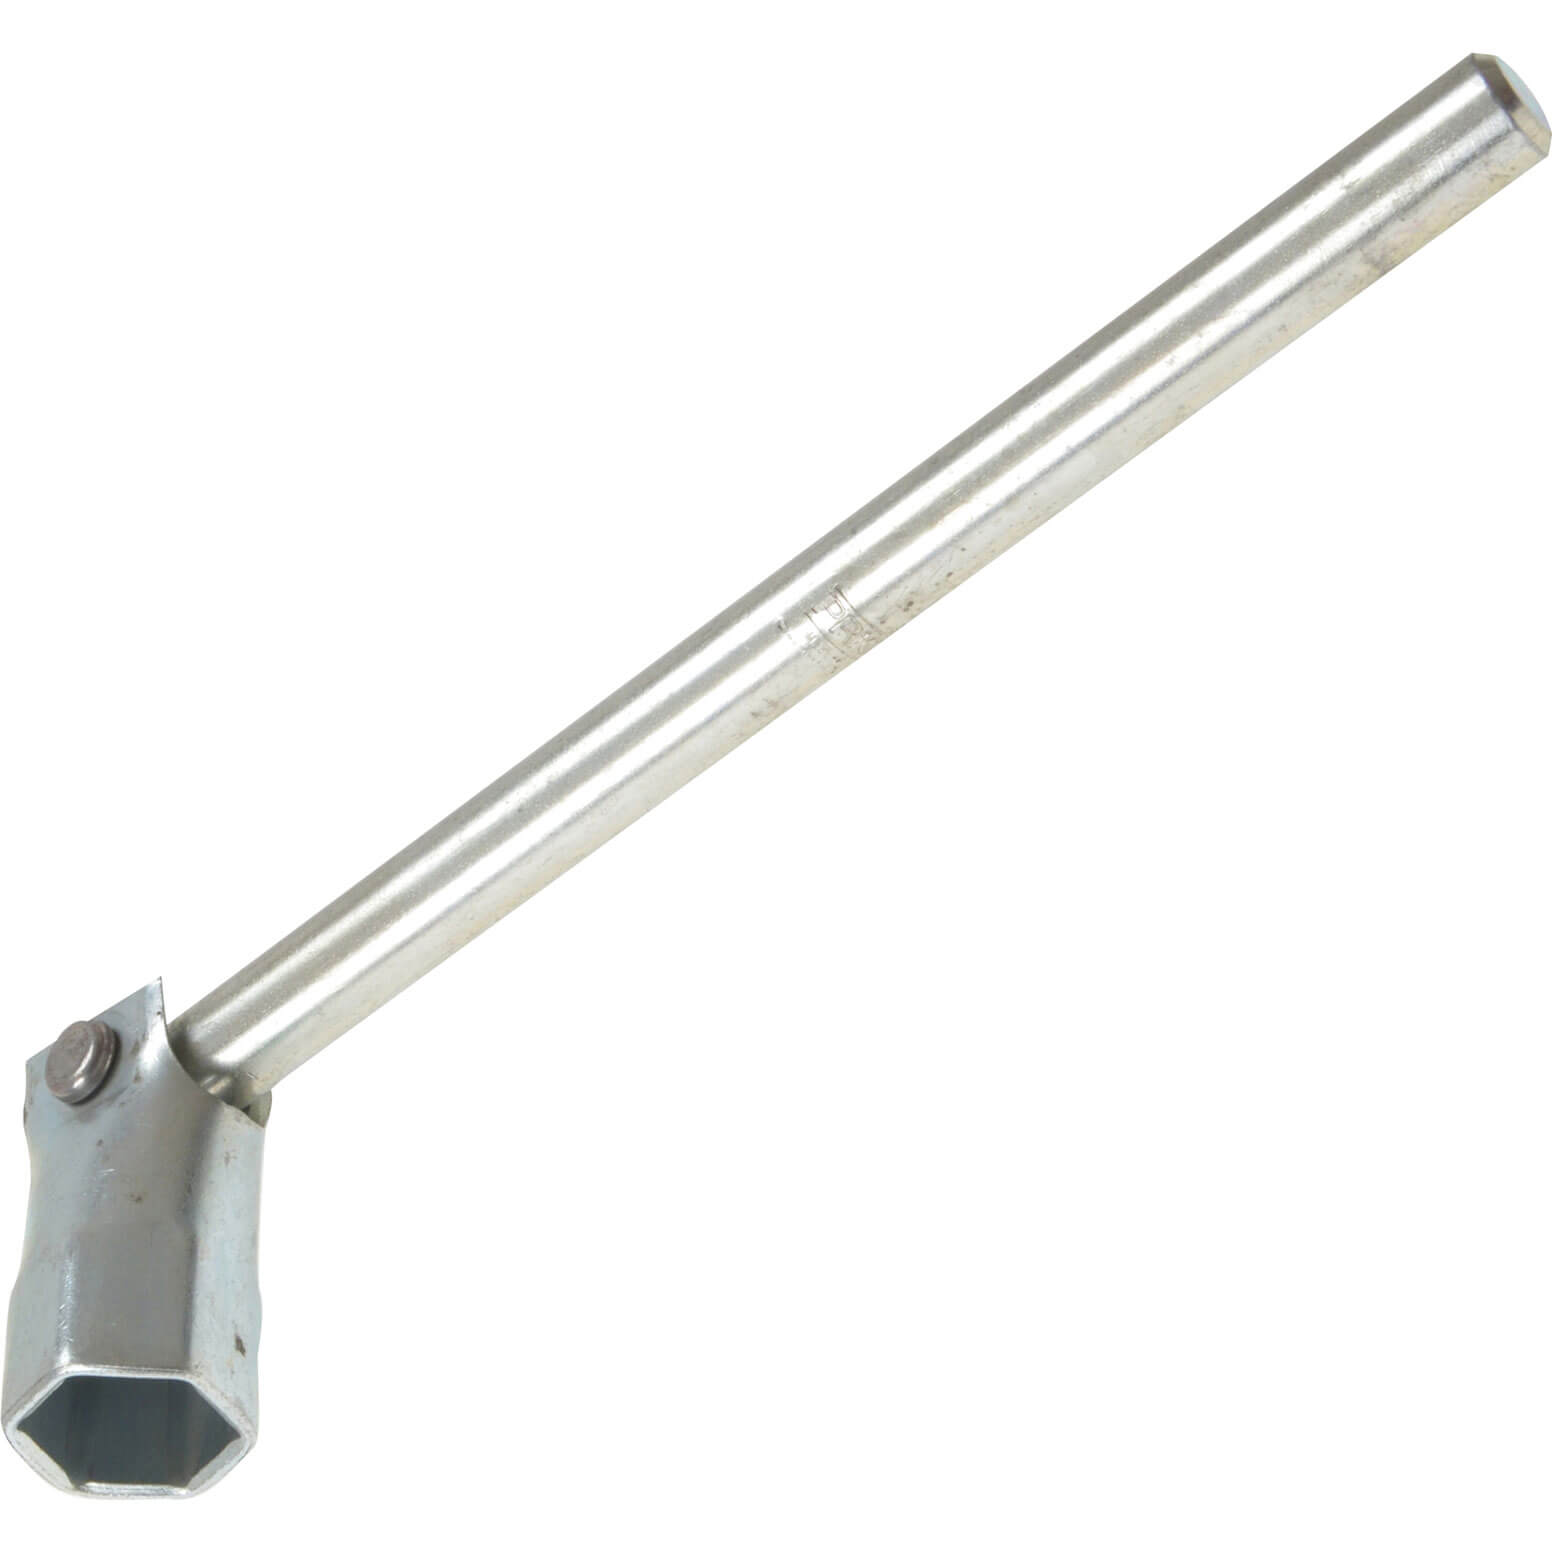 Image of Priory 310 Hexagon Scaffold Spanner Whitworth 1/2" Round Steel Socket